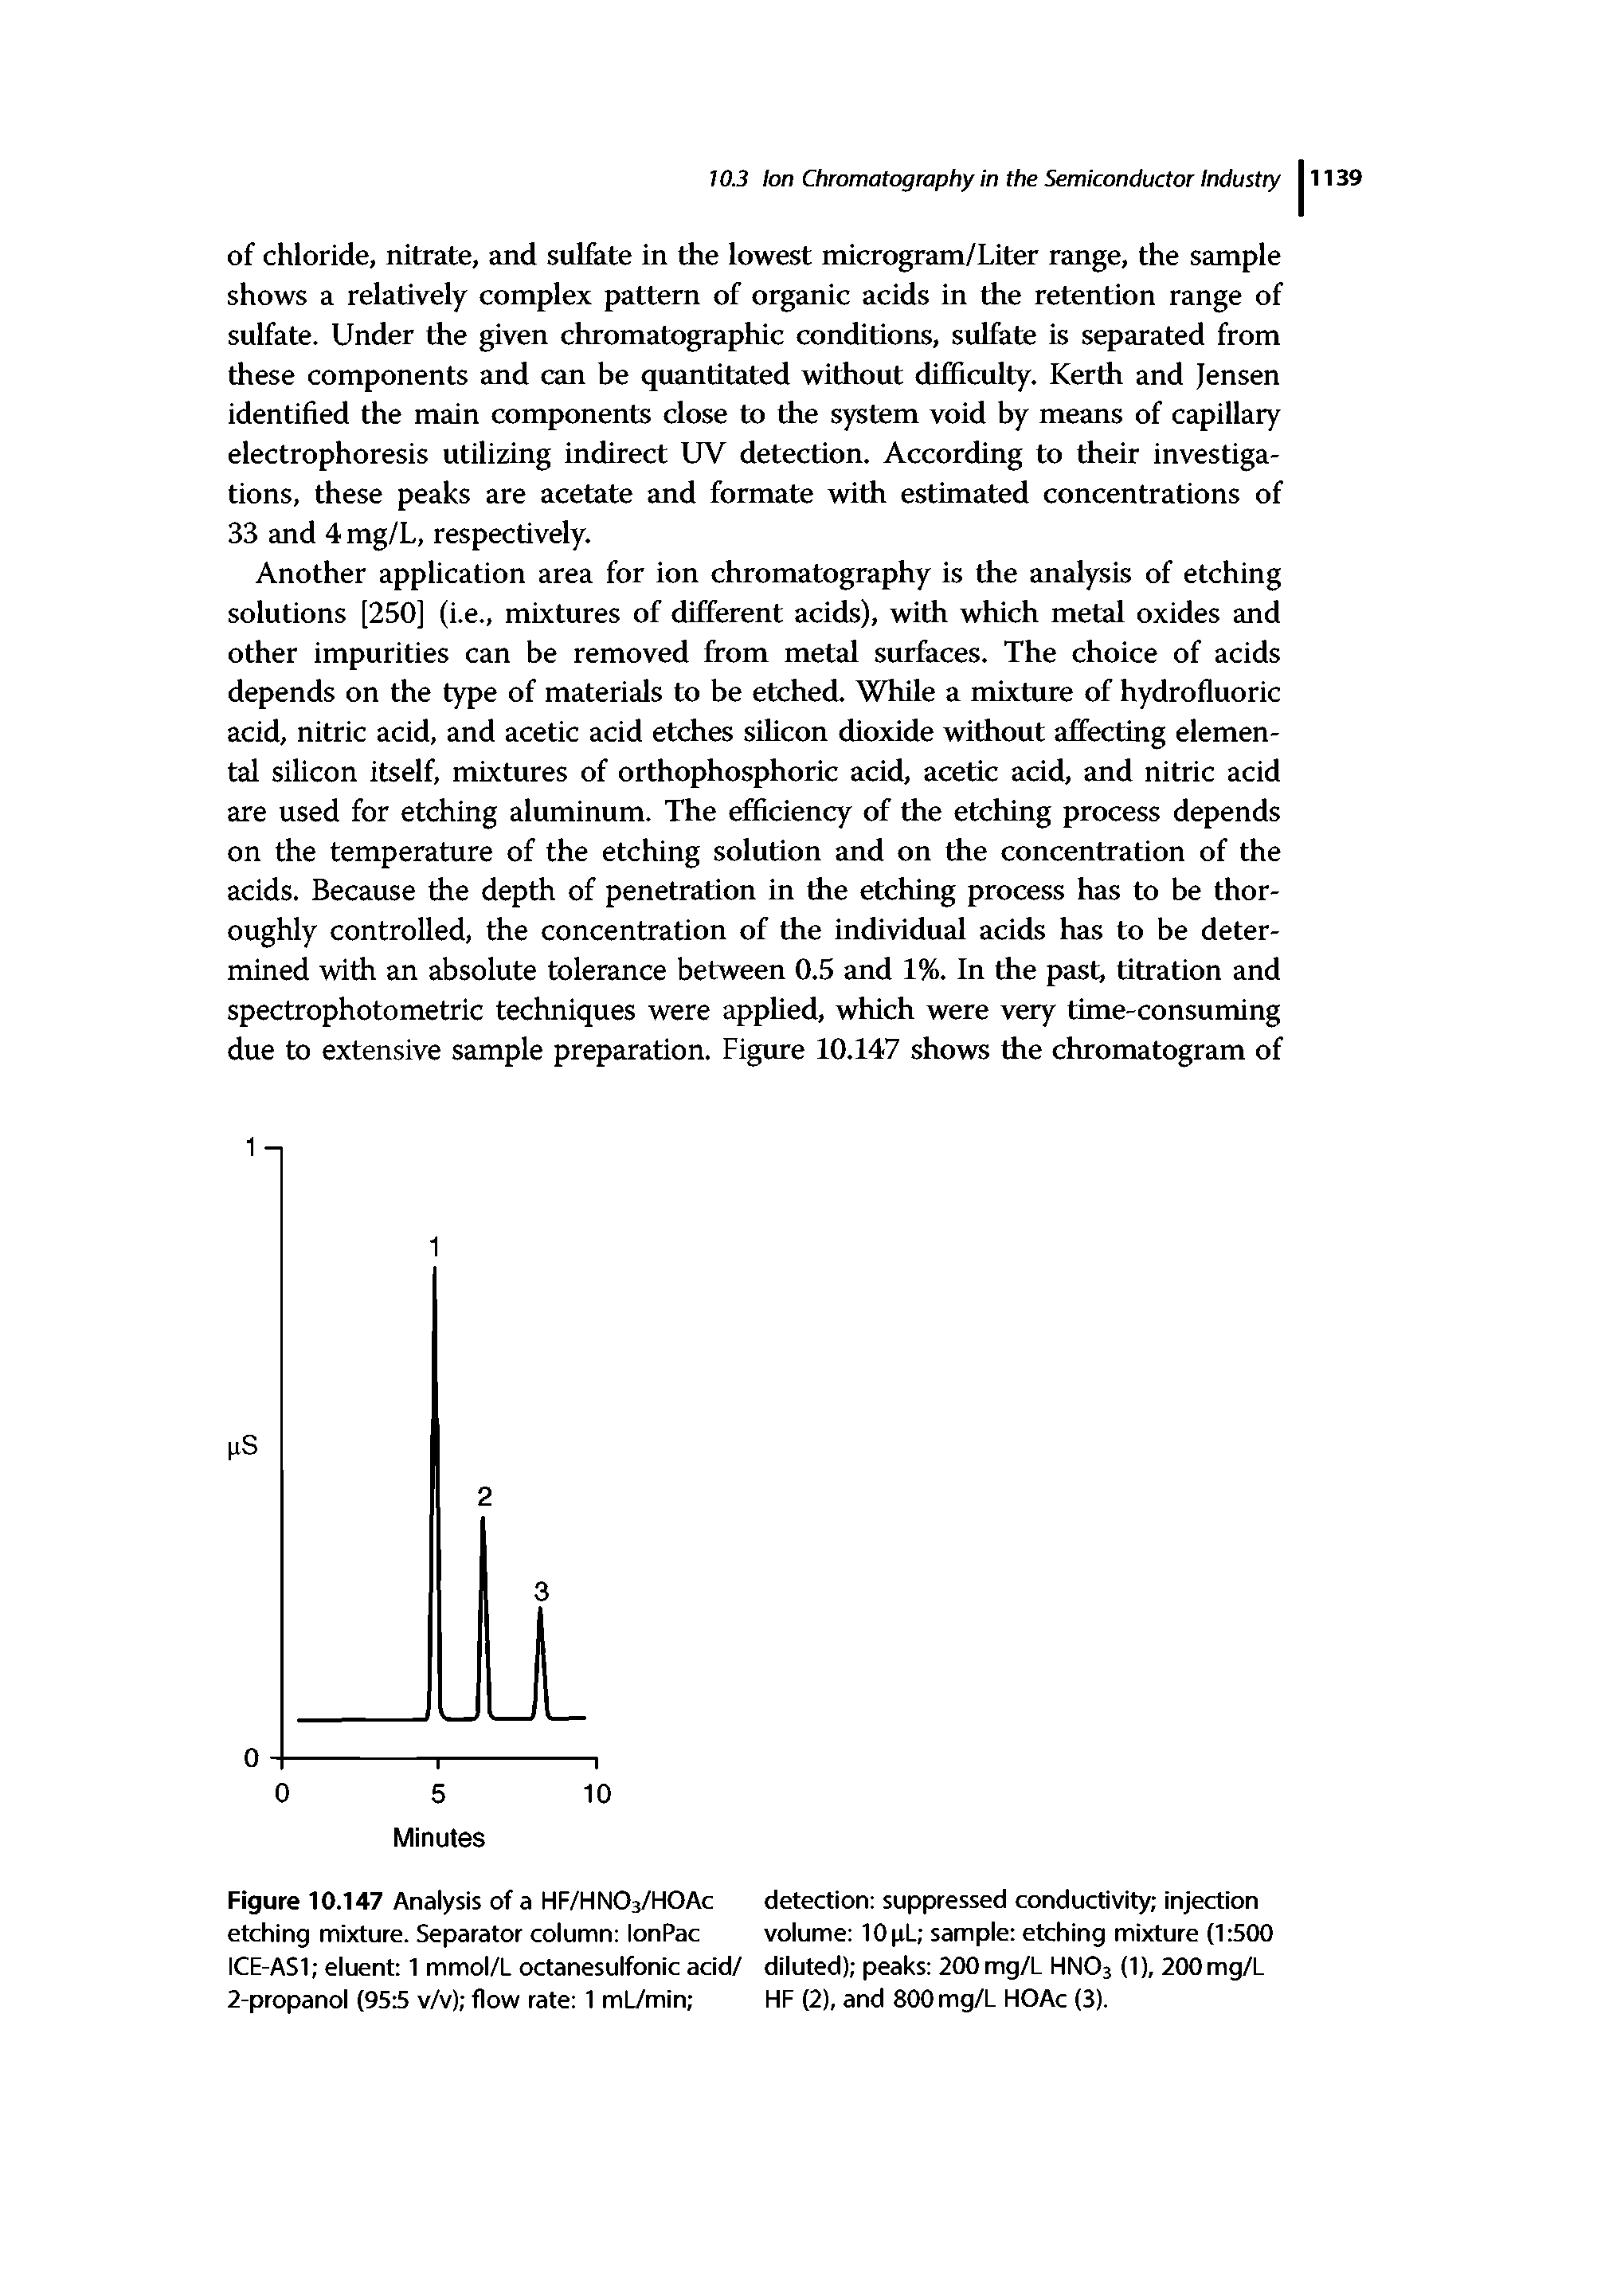 Figure 10.147 Analysis of a HF/HNOb/HOAc etching mixture. Separator column lonPac ICE-AS1 eluent 1 mmol/L octanesulfonic acid/ 2-propanol (955 v/v) flow rate 1 mt/min ...